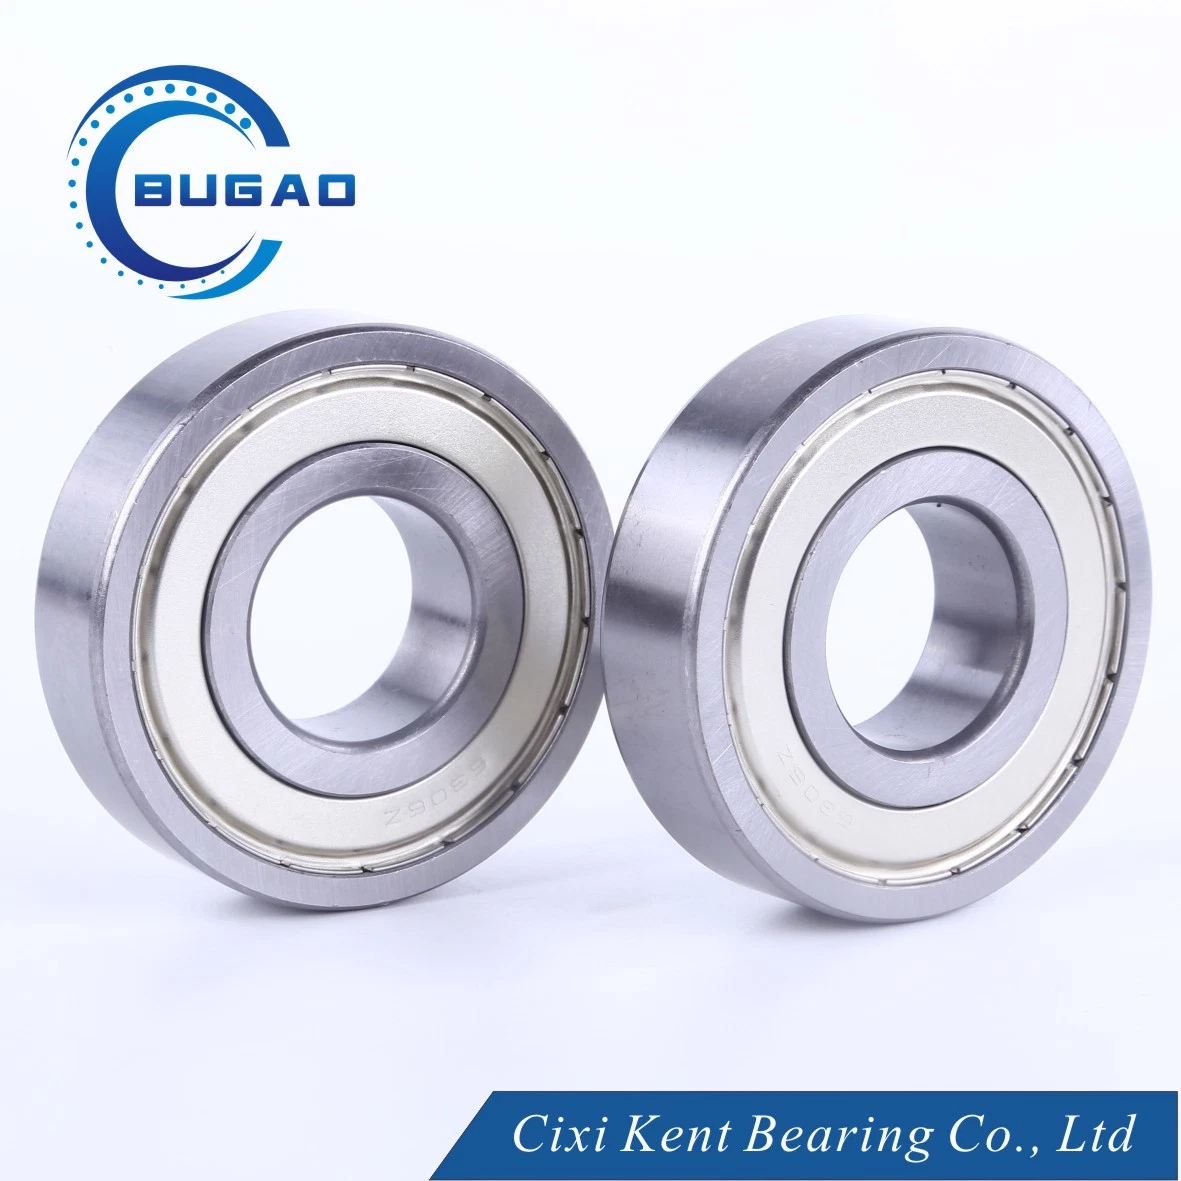 Deep Groove Ball Bearings for Motorcycle Parts Engine Parts Auto Parts 1688 Customized Bearing